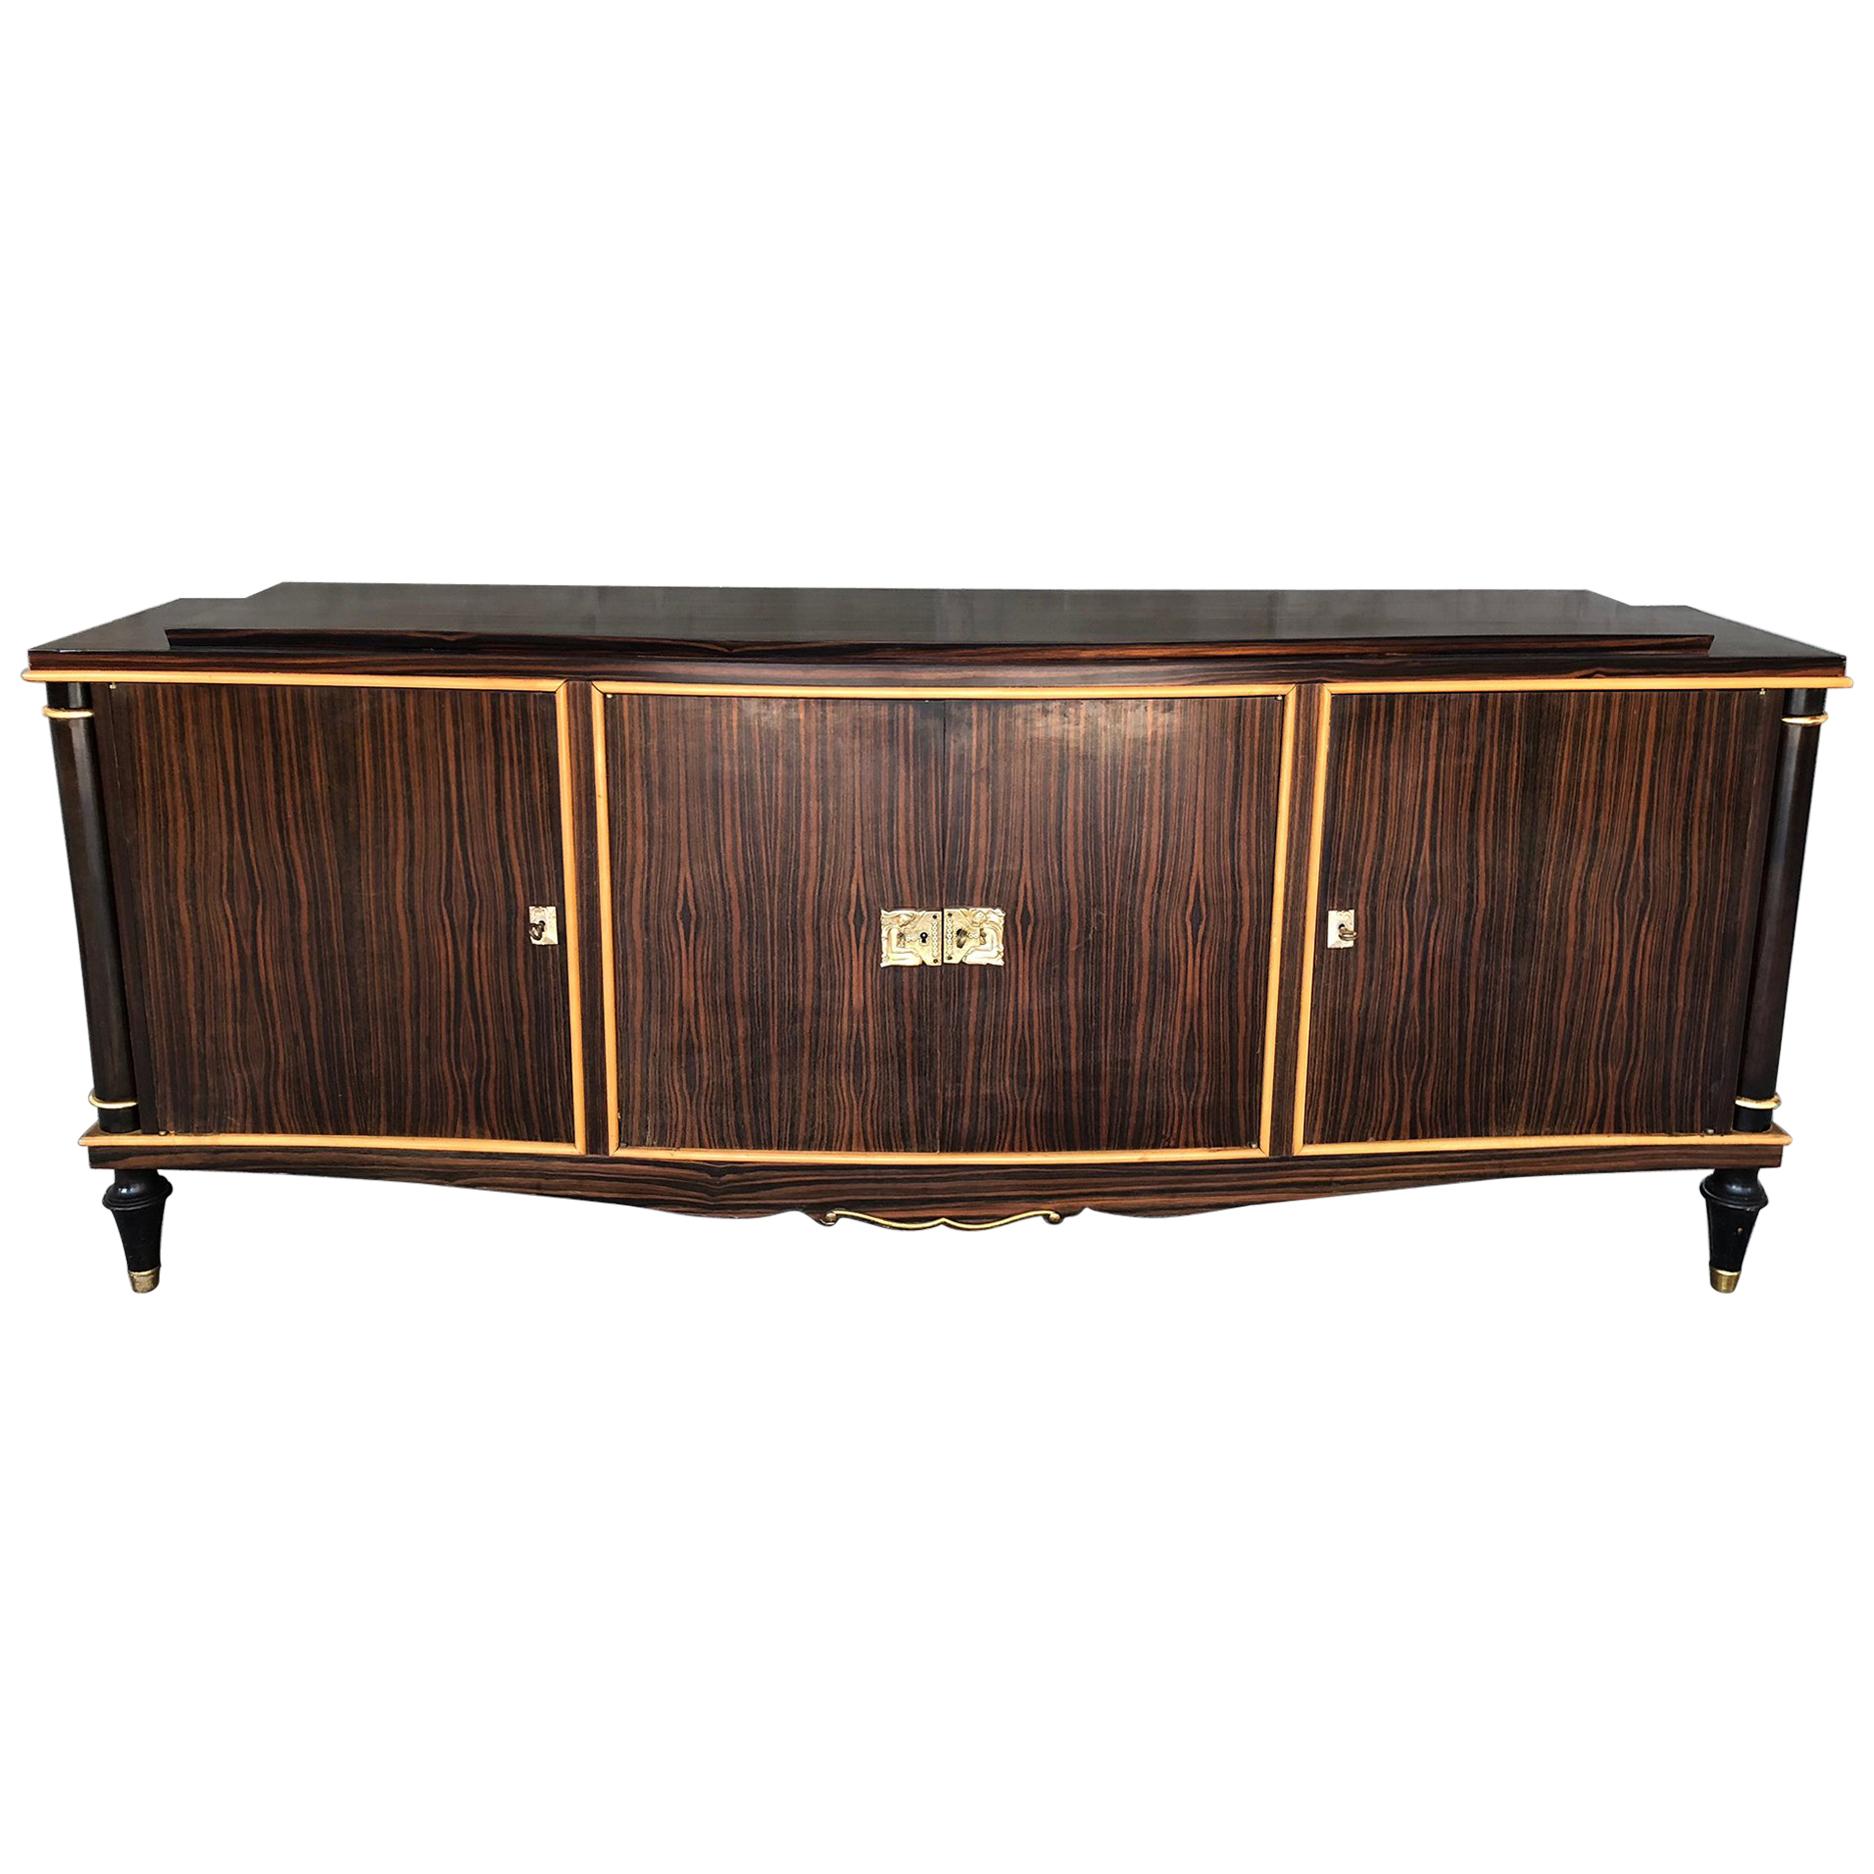 Exceptional French Macassar Ebony Art Deco Sideboard, 1940s For Sale